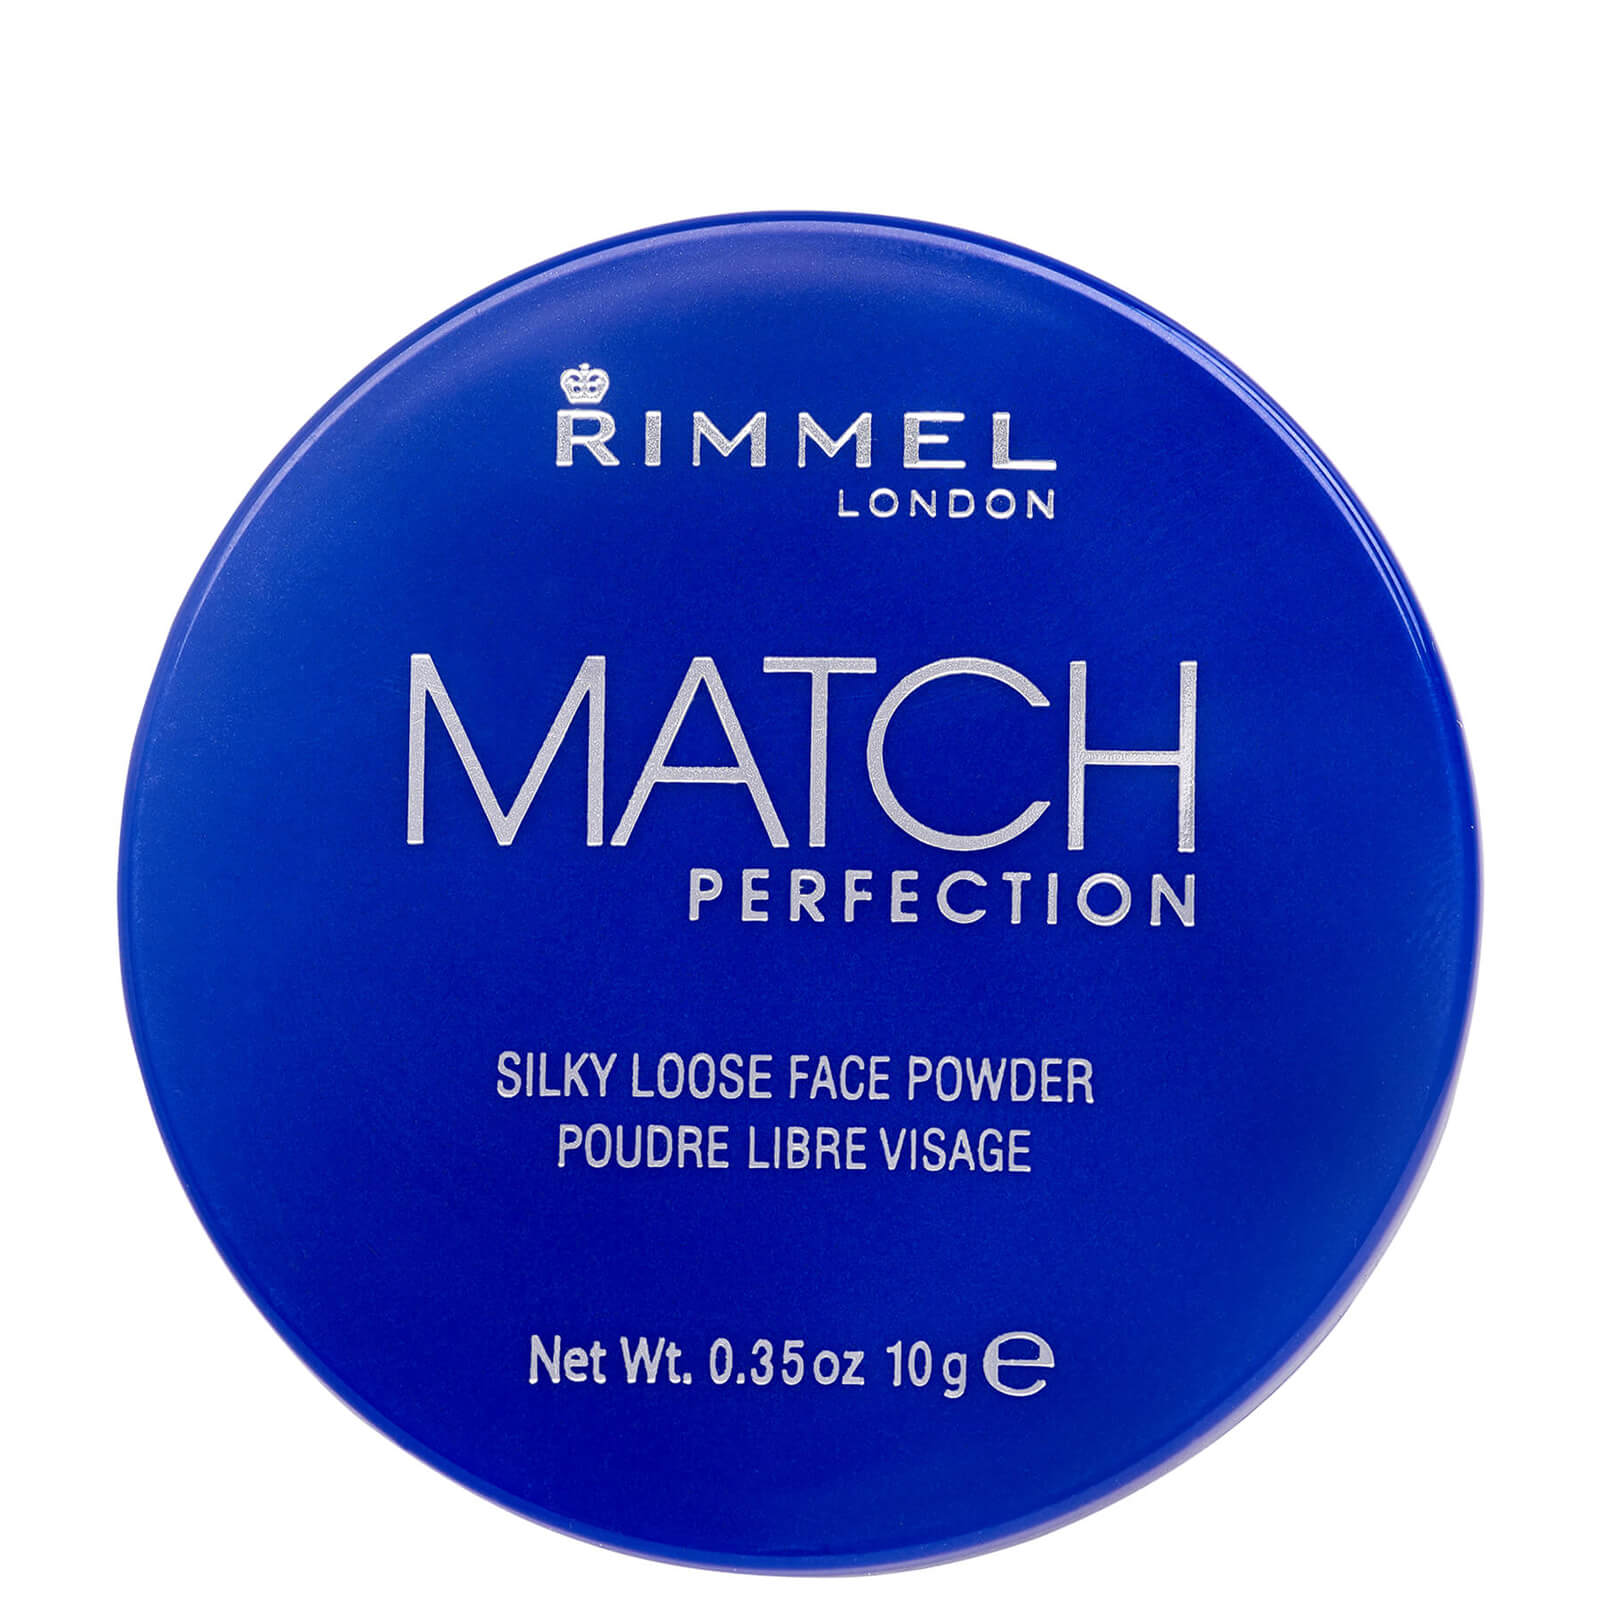 Image of Rimmel Match Perfection cipria in polvere - trasparente